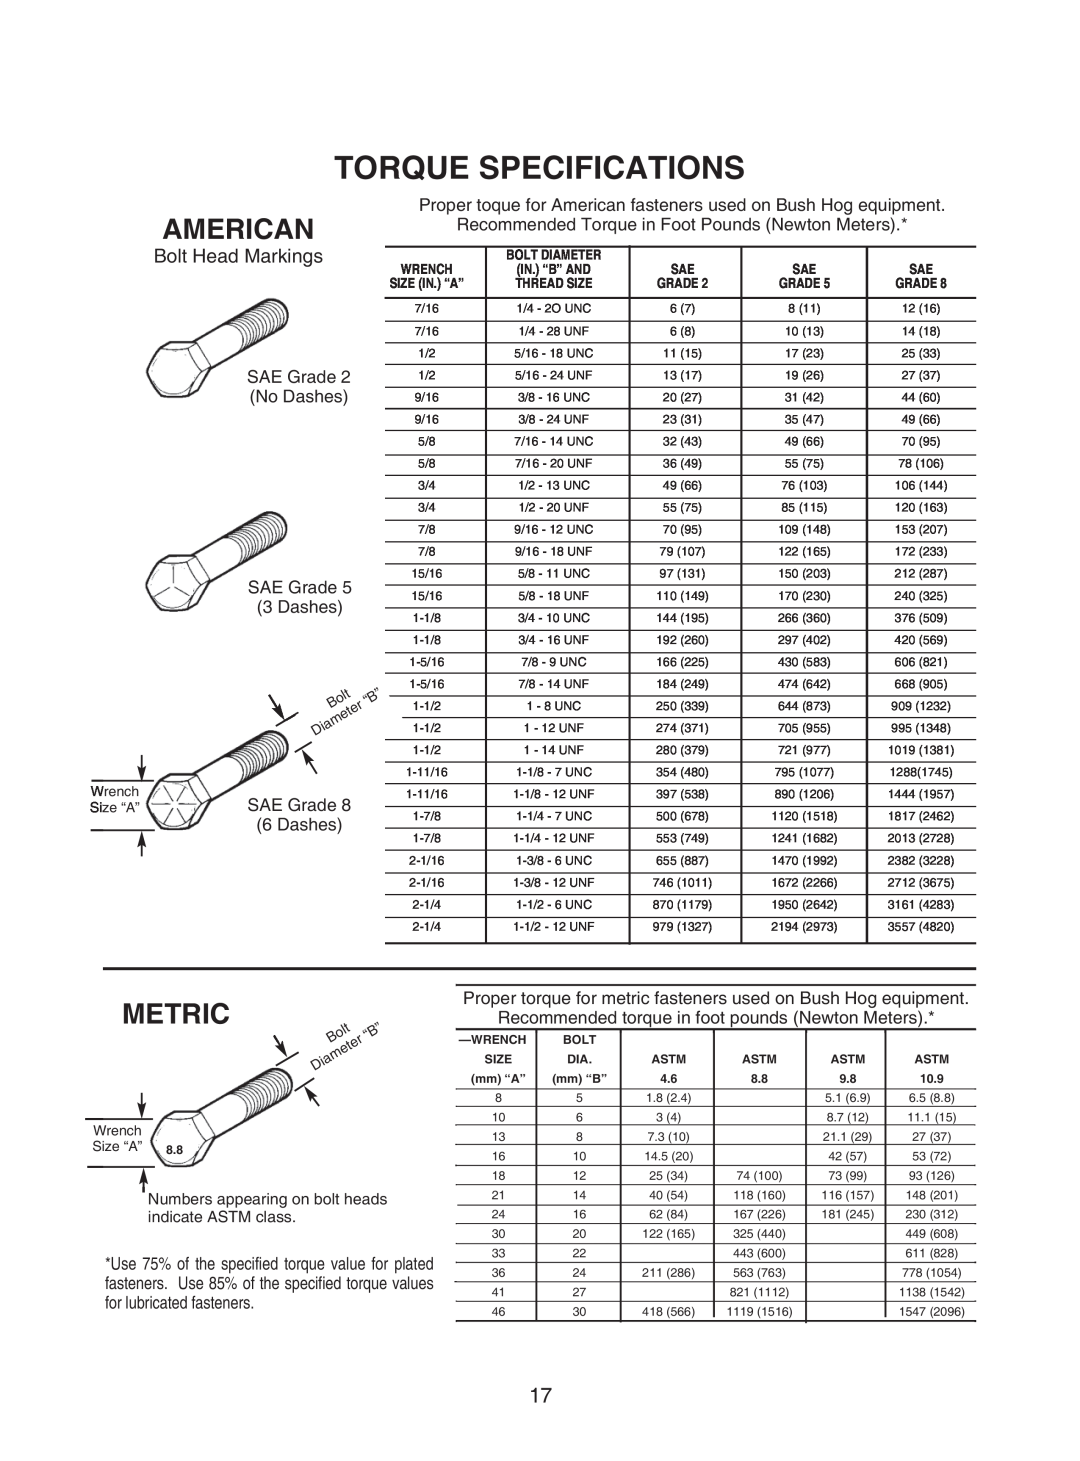 Bush Hog GC-250 manual Torque Specifications, American, Metric, Wrench, Bolt Diameter, Astm, Size, mm “A”, mm “B”, 10.9 